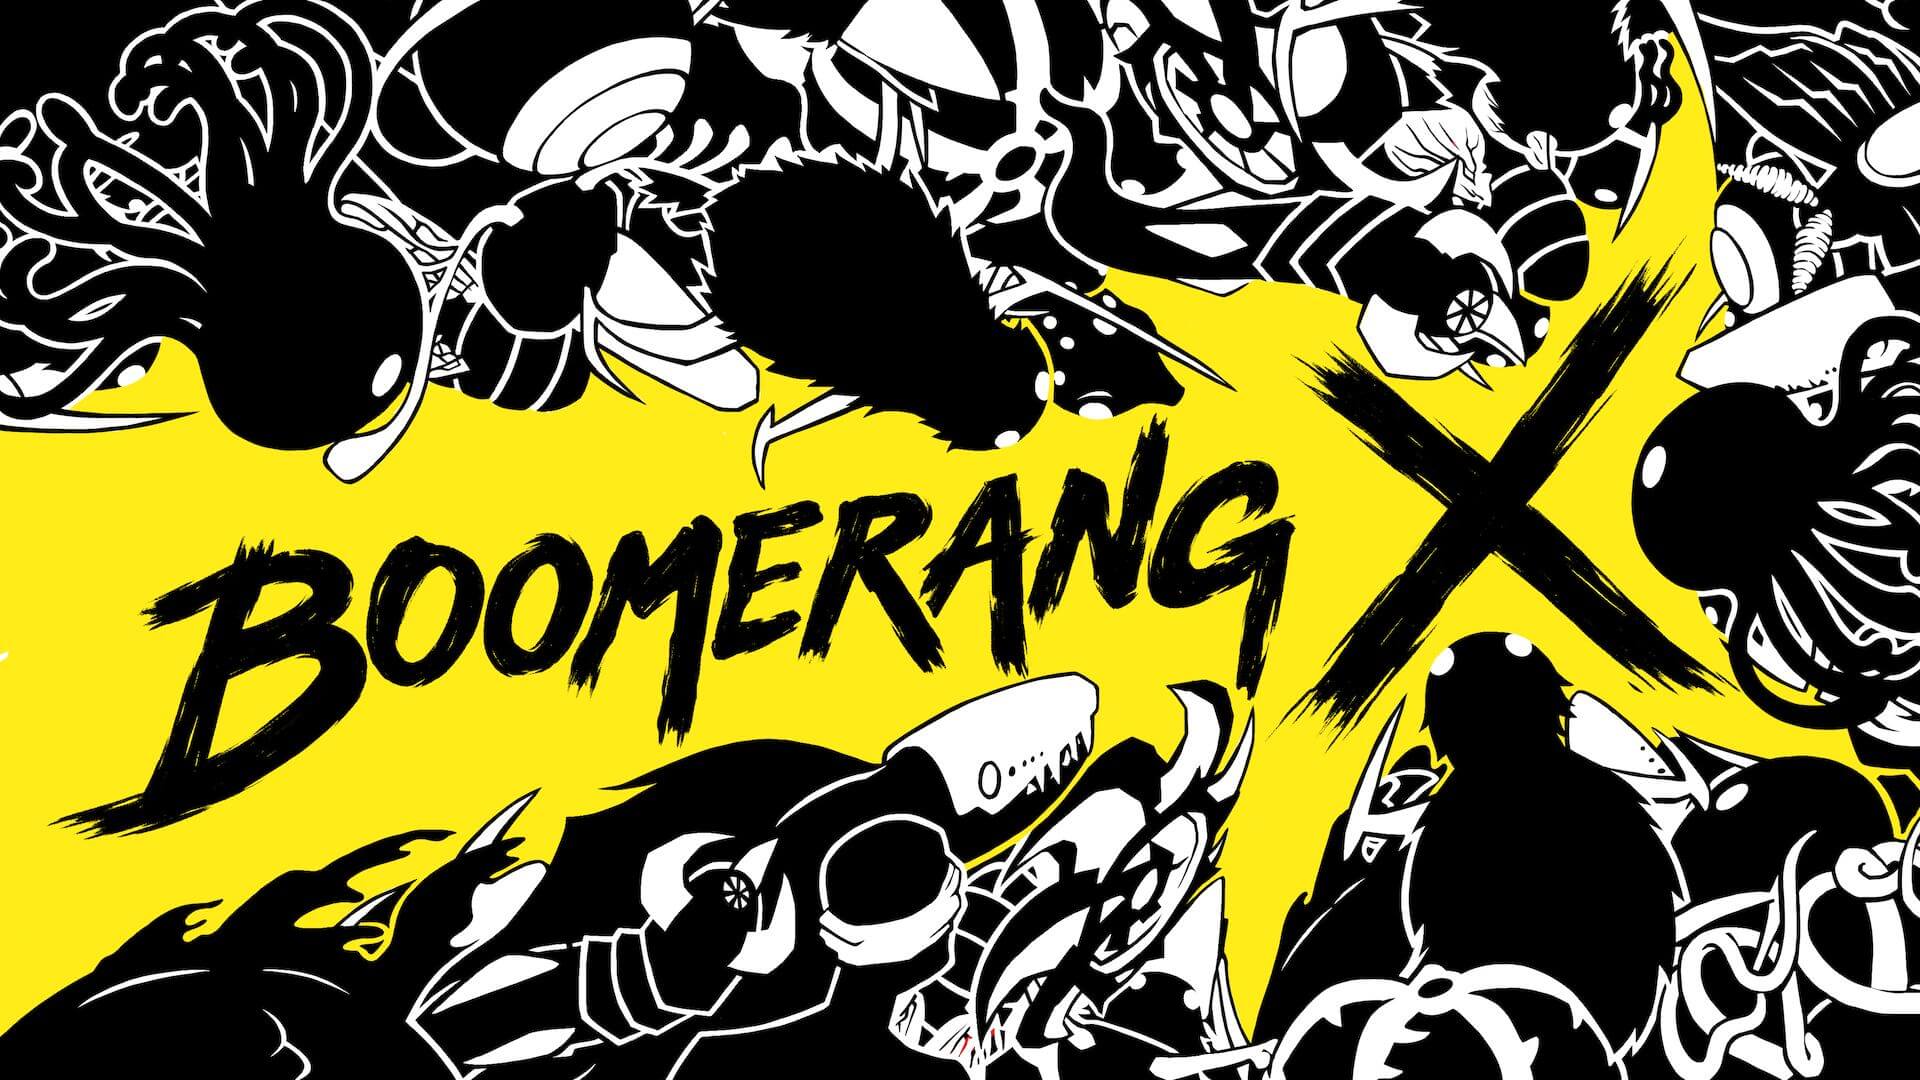 Devolver Digital Introduces “Boomerang X” to PC and Nintendo Switch This Spring – PC Demo Available